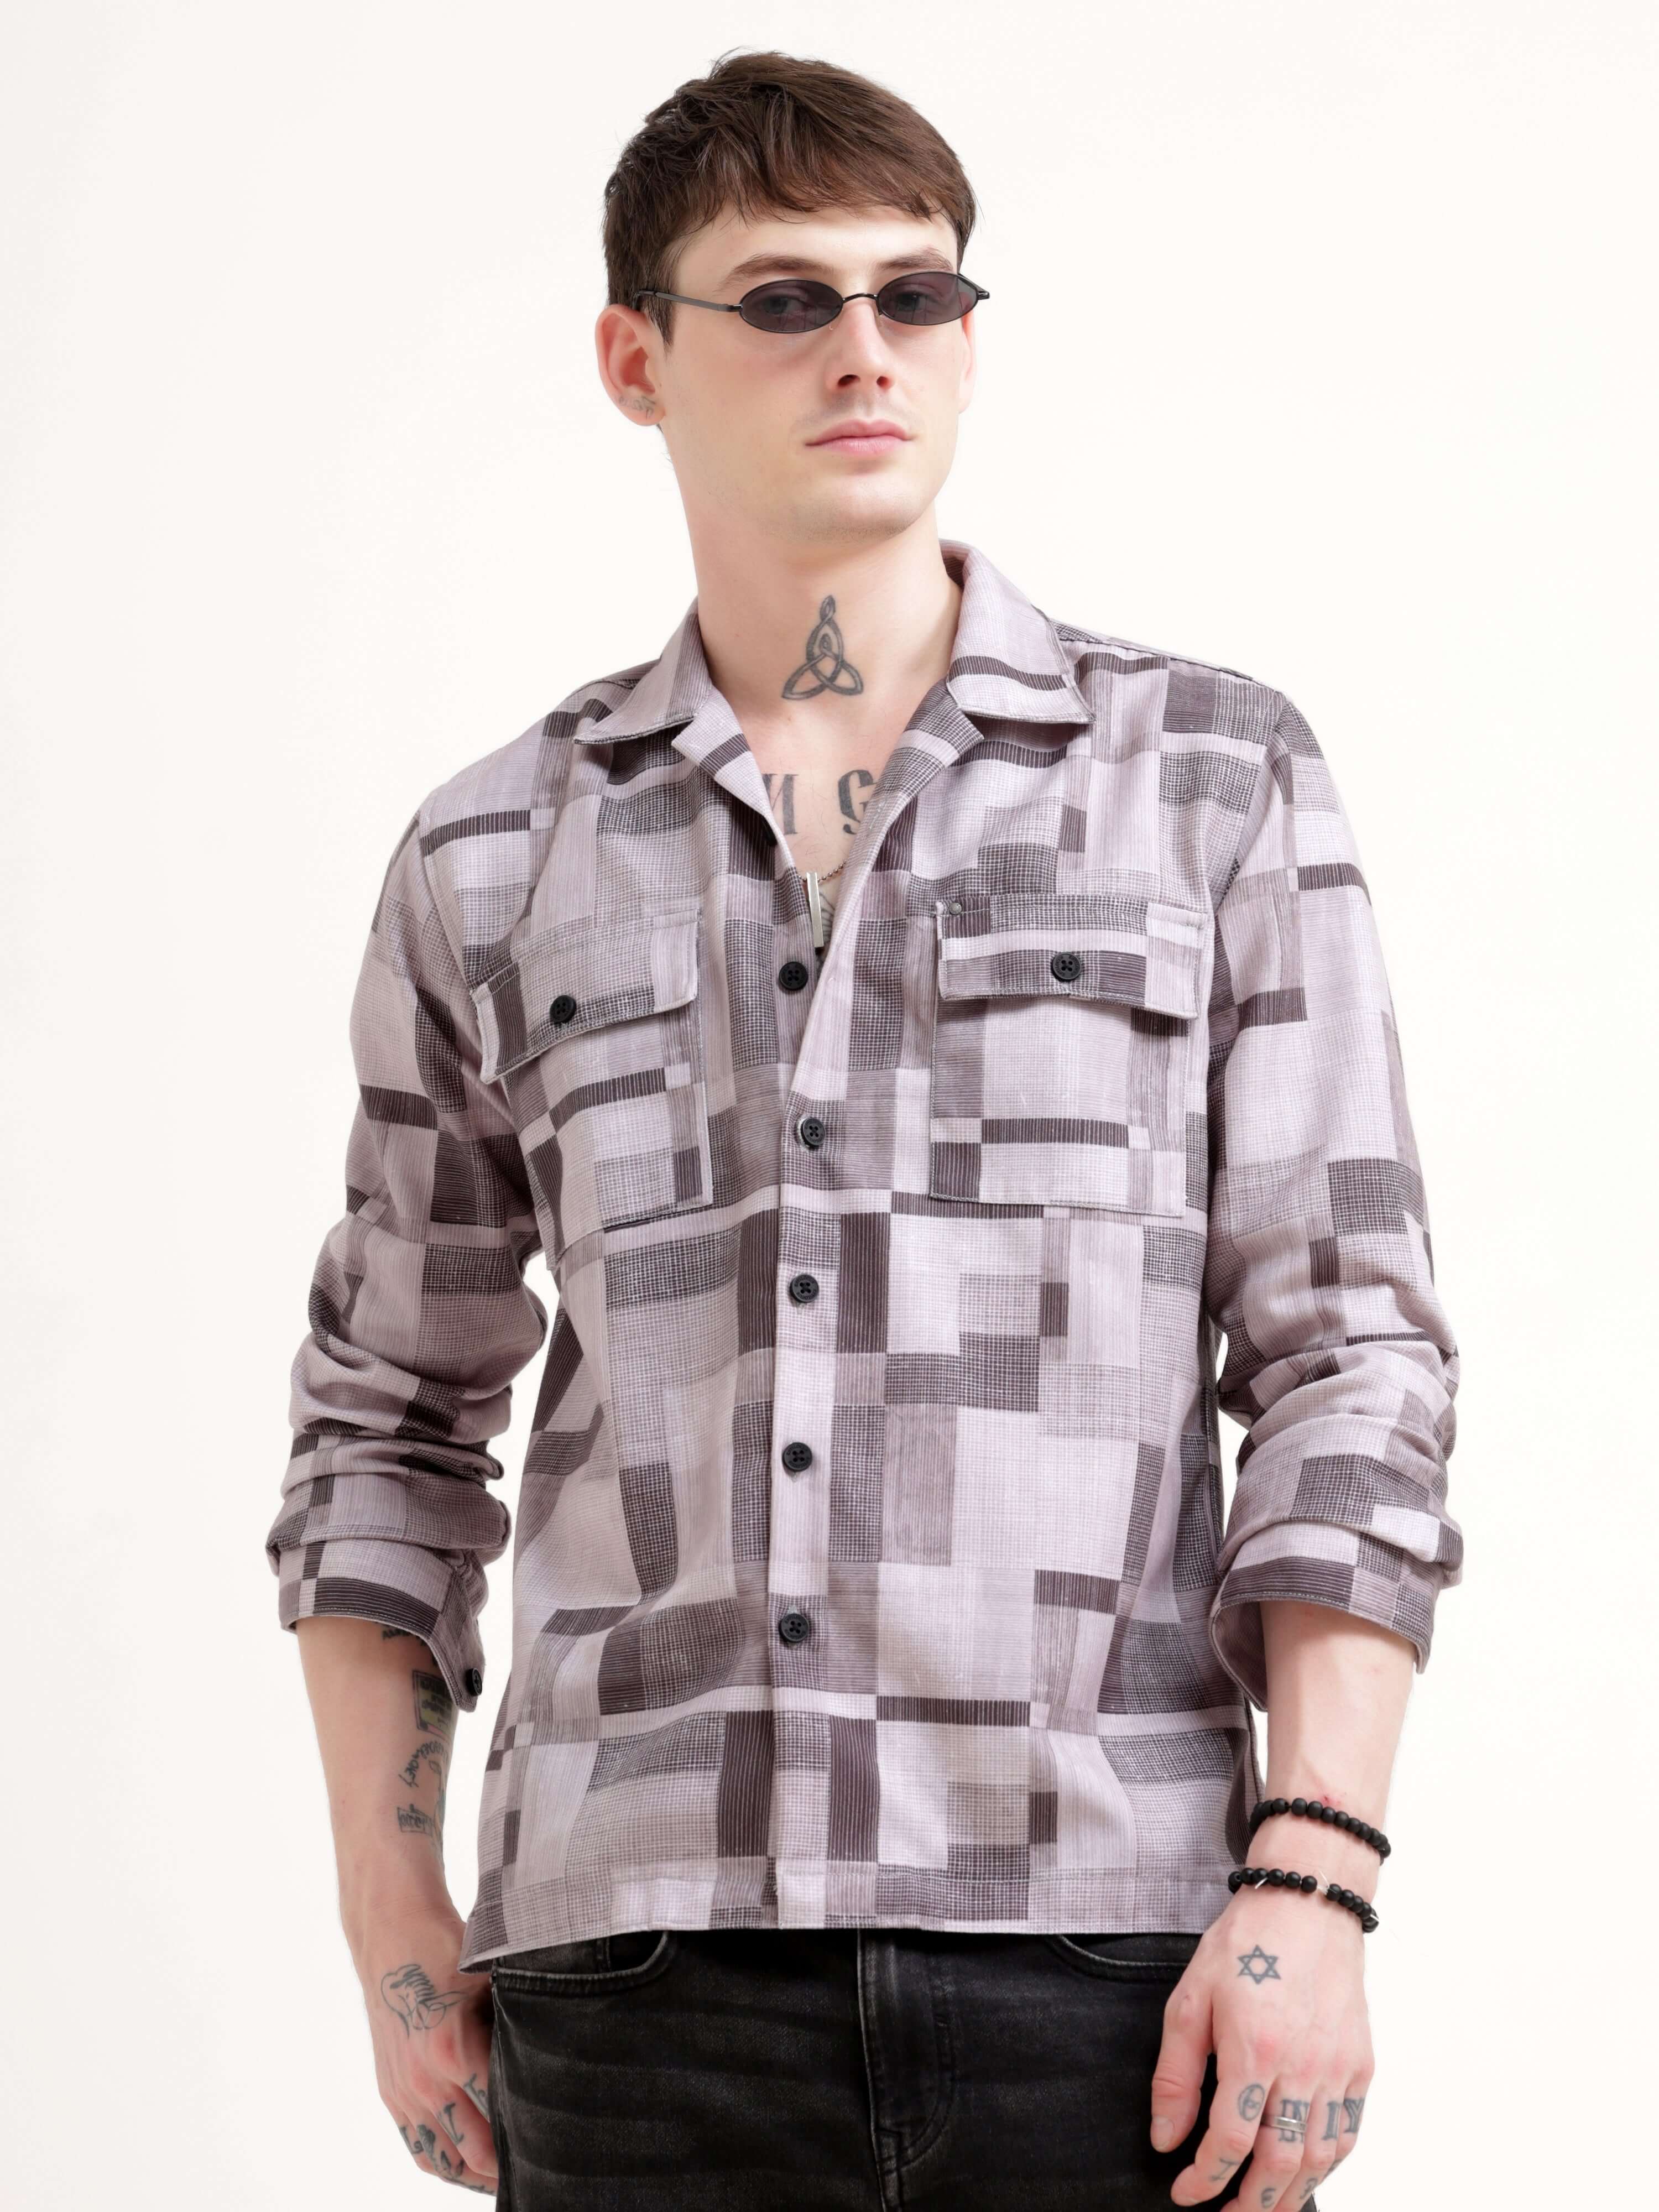 Geovibrance abstract brown Overshirt - Men's Casual Wear shop online at Estilocus. Bag this abstract Geovibrance overshirt for a chic, comfy fit & double-pocket design. Perfect for casual flair. Get yours today!